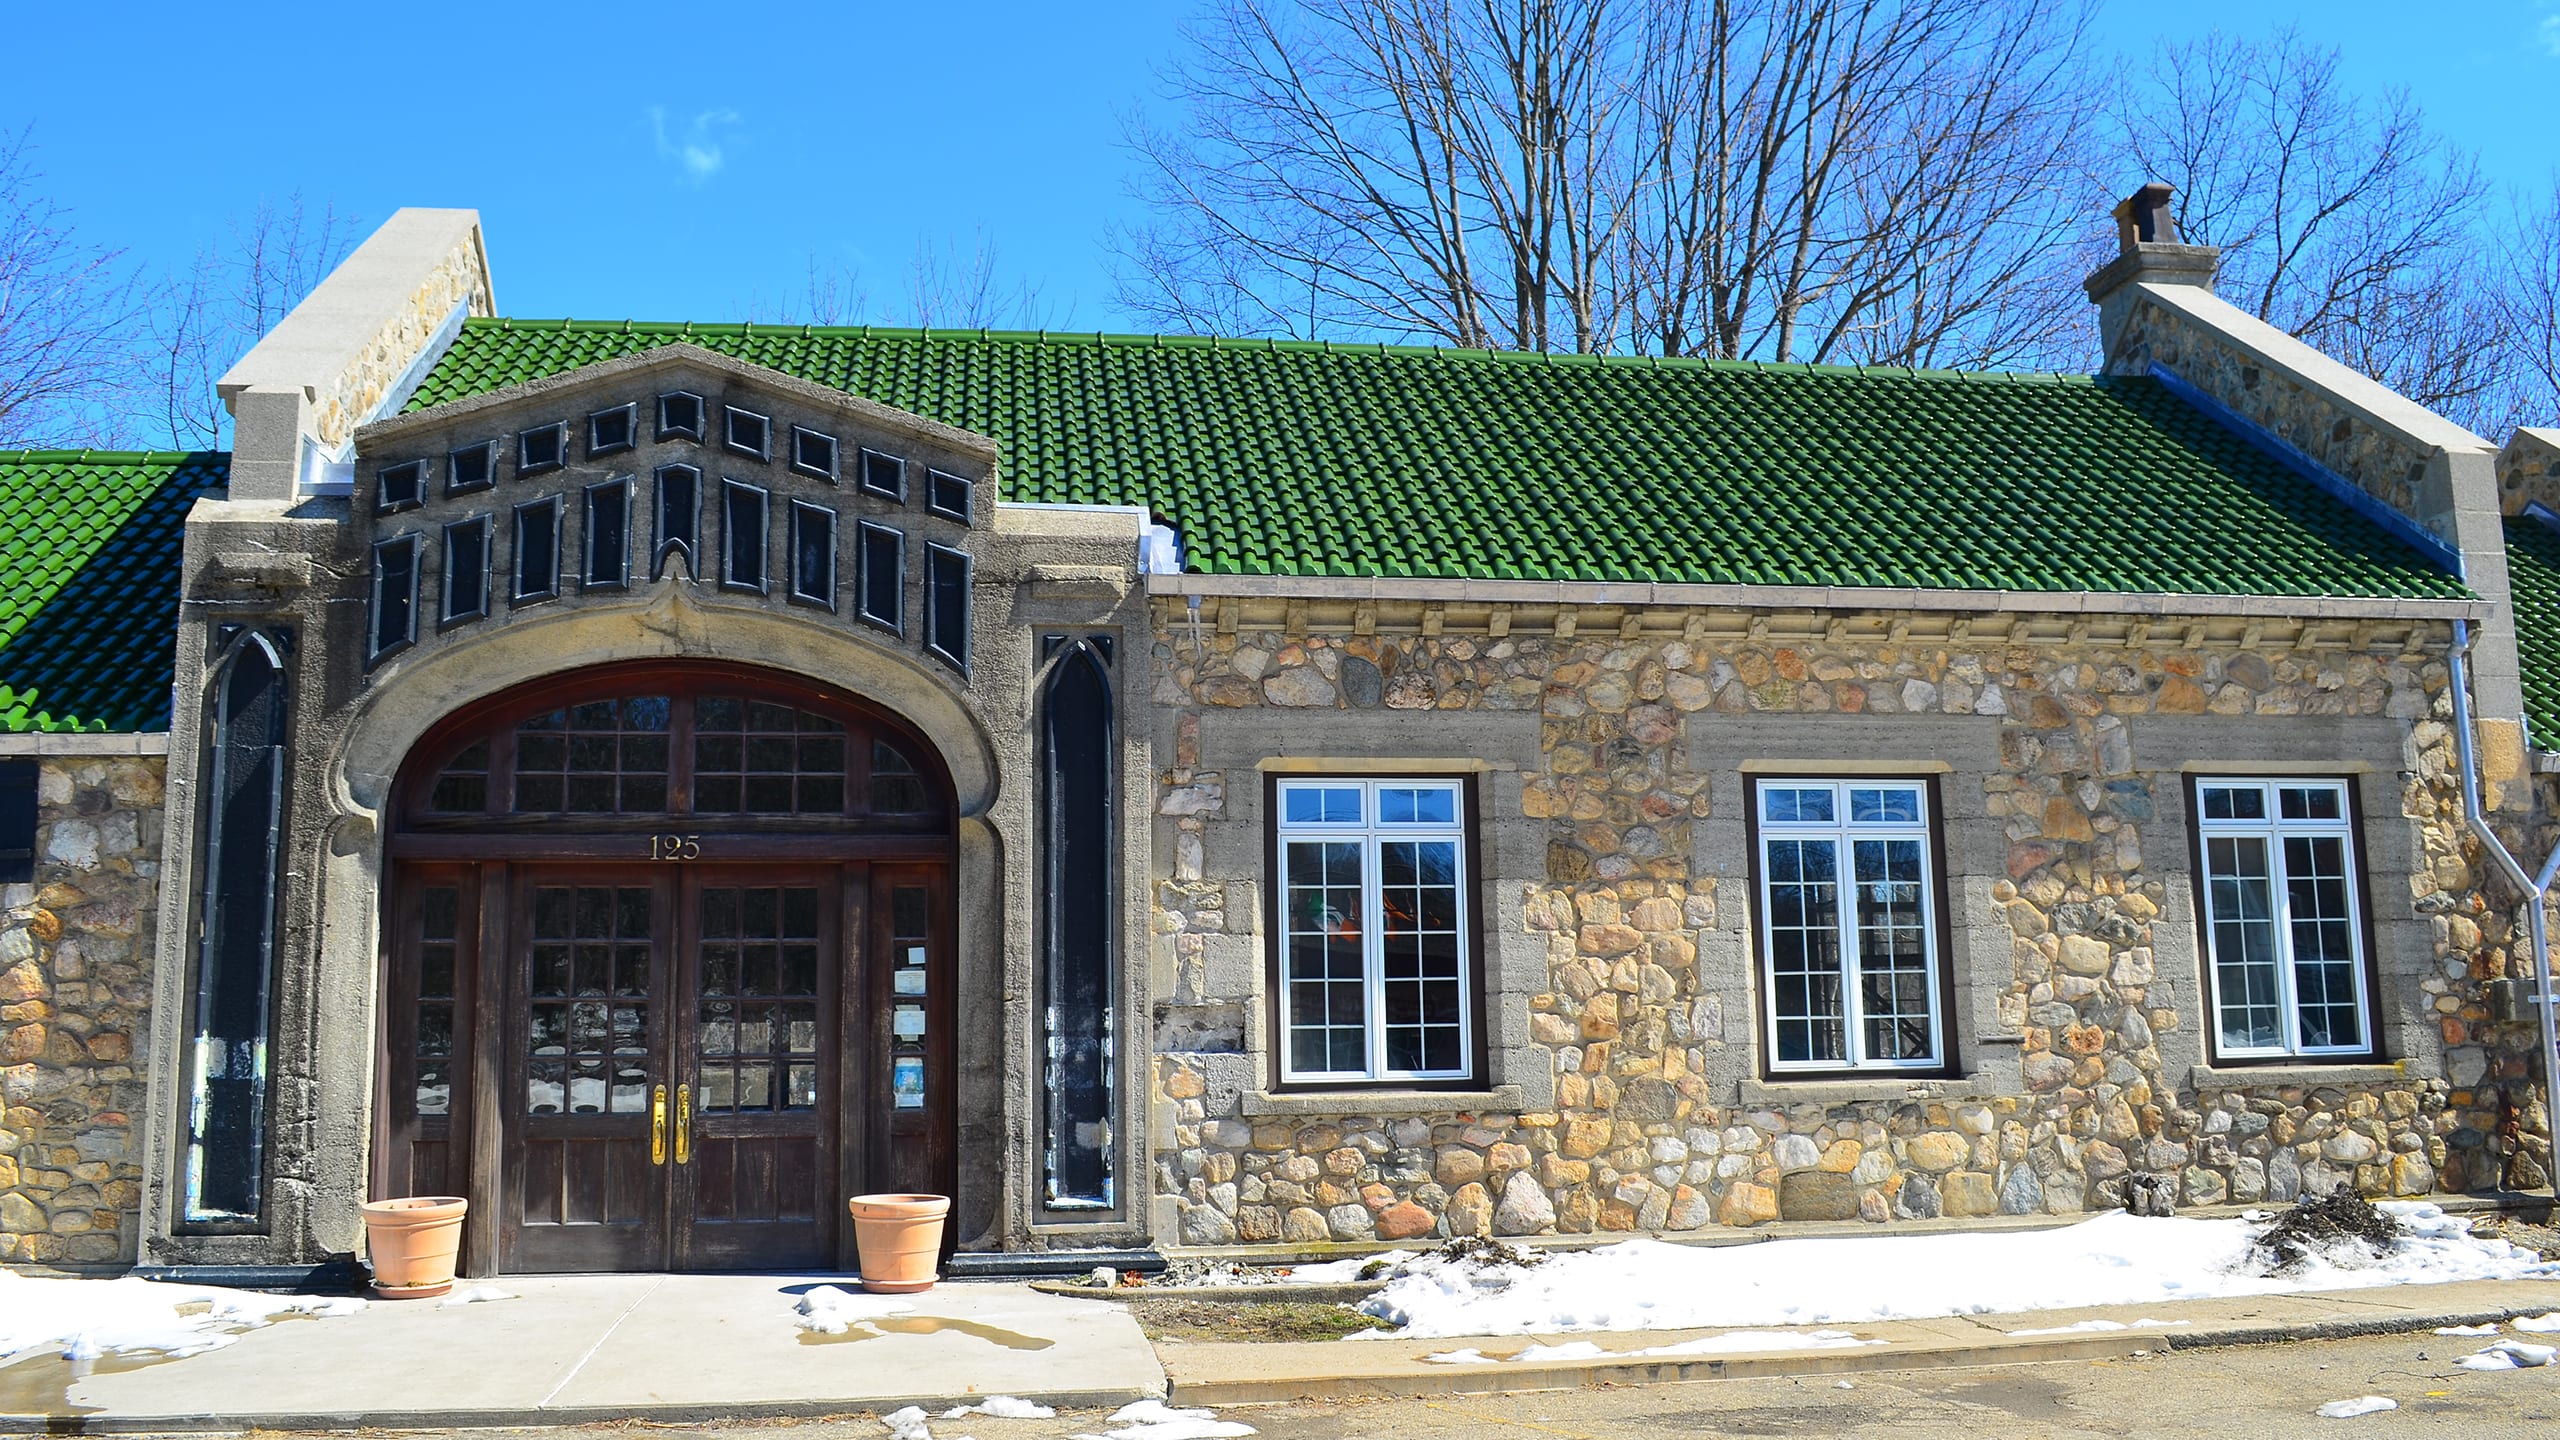 Lake Hopatcong Train Station Featuring Historic Ludowici Clay Roof Tile